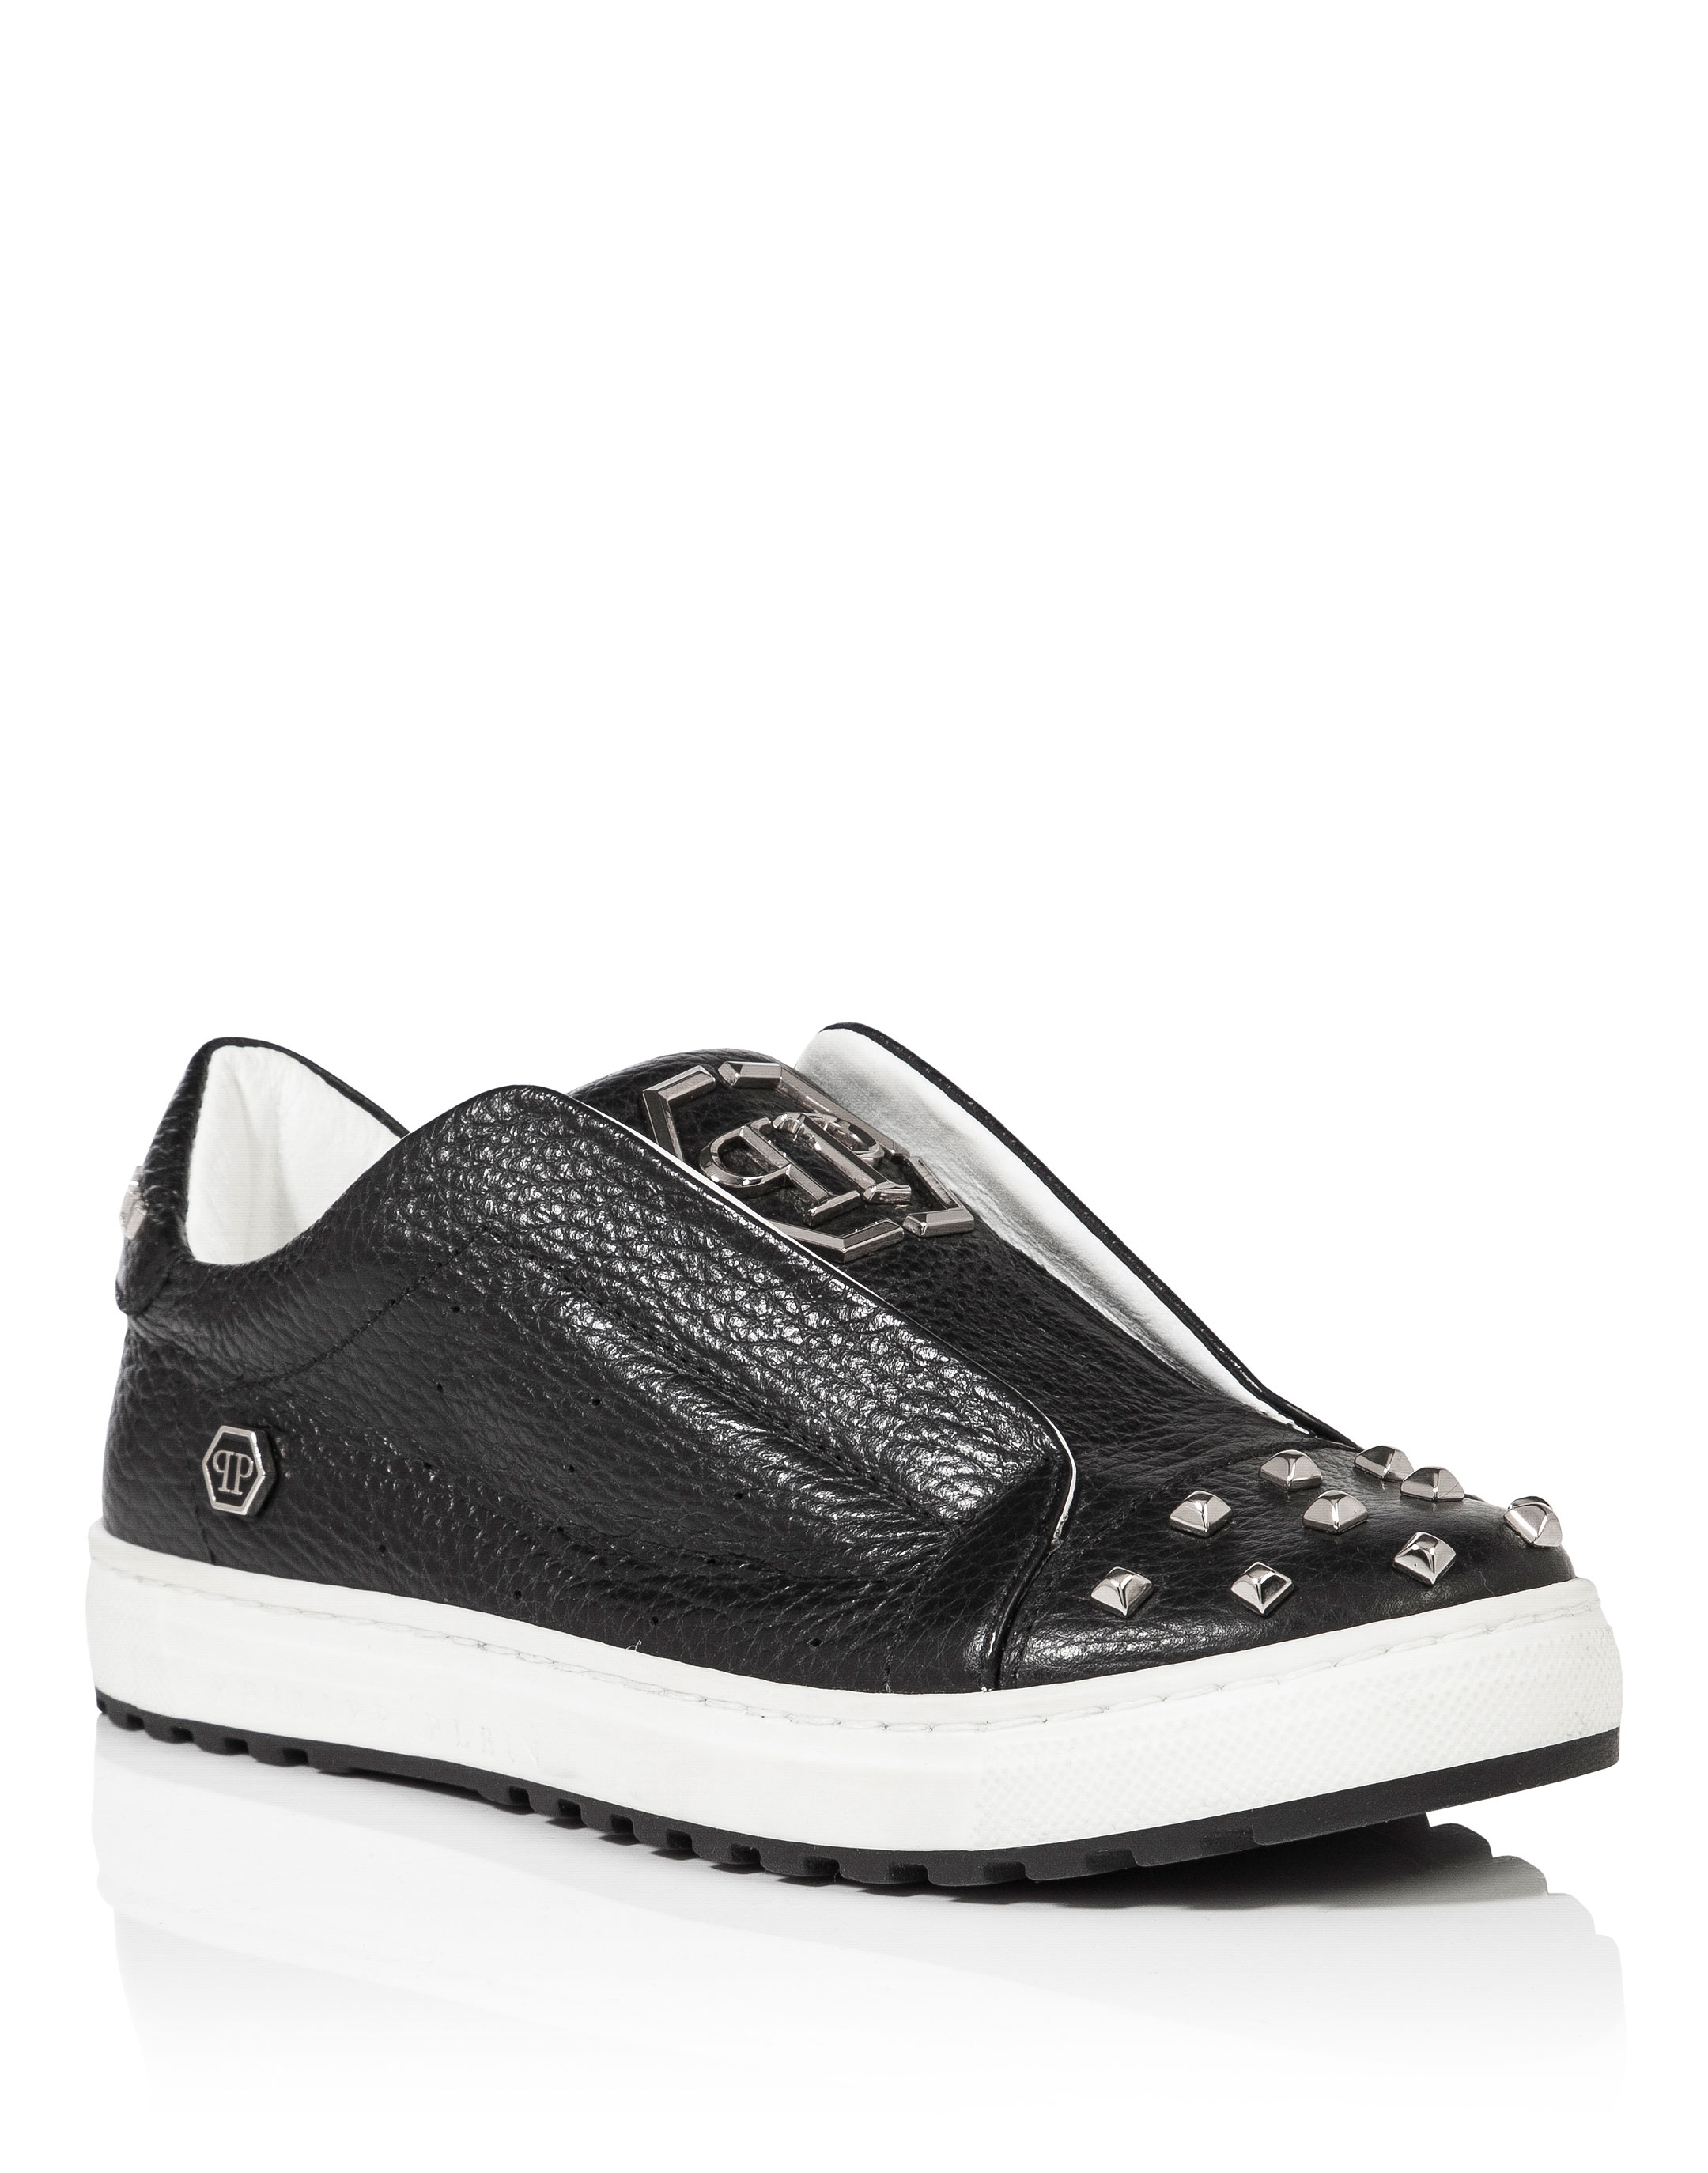 Lo-Top Sneakers "Tom" | Philipp Plein Outlet